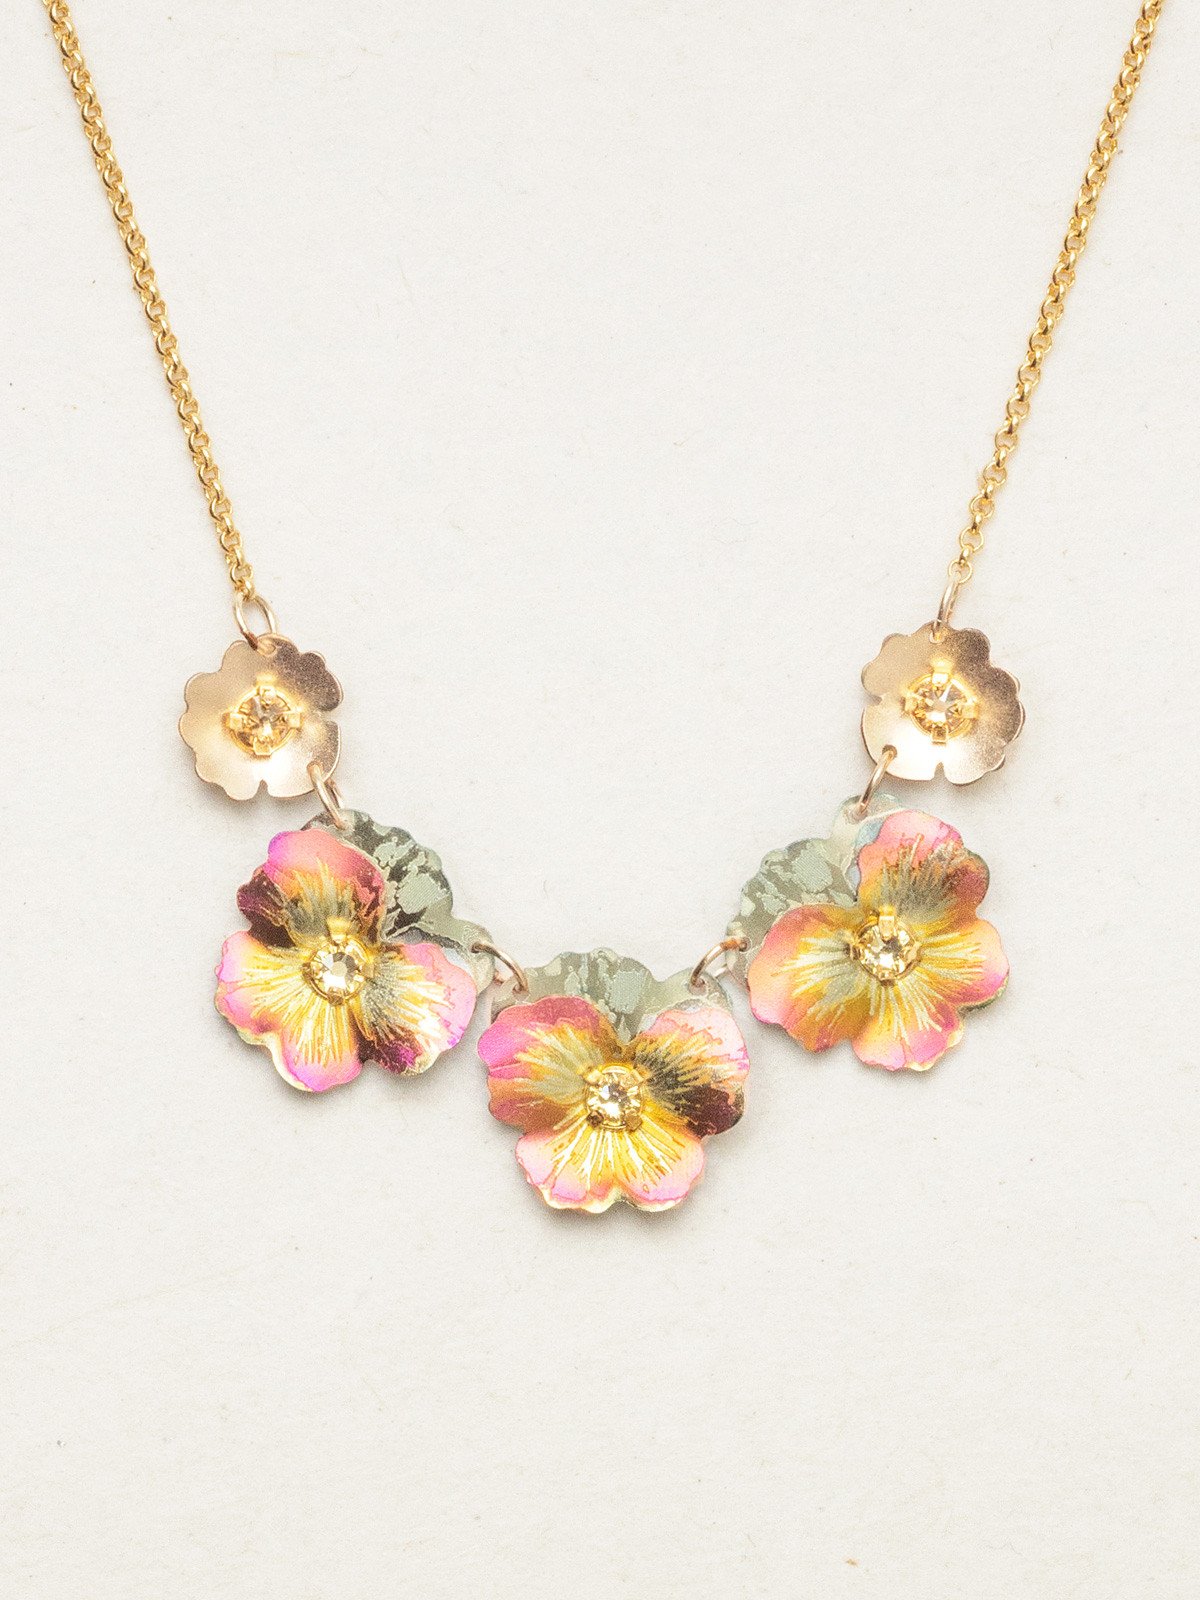 pansy necklace by Holly Yashi in apricot color